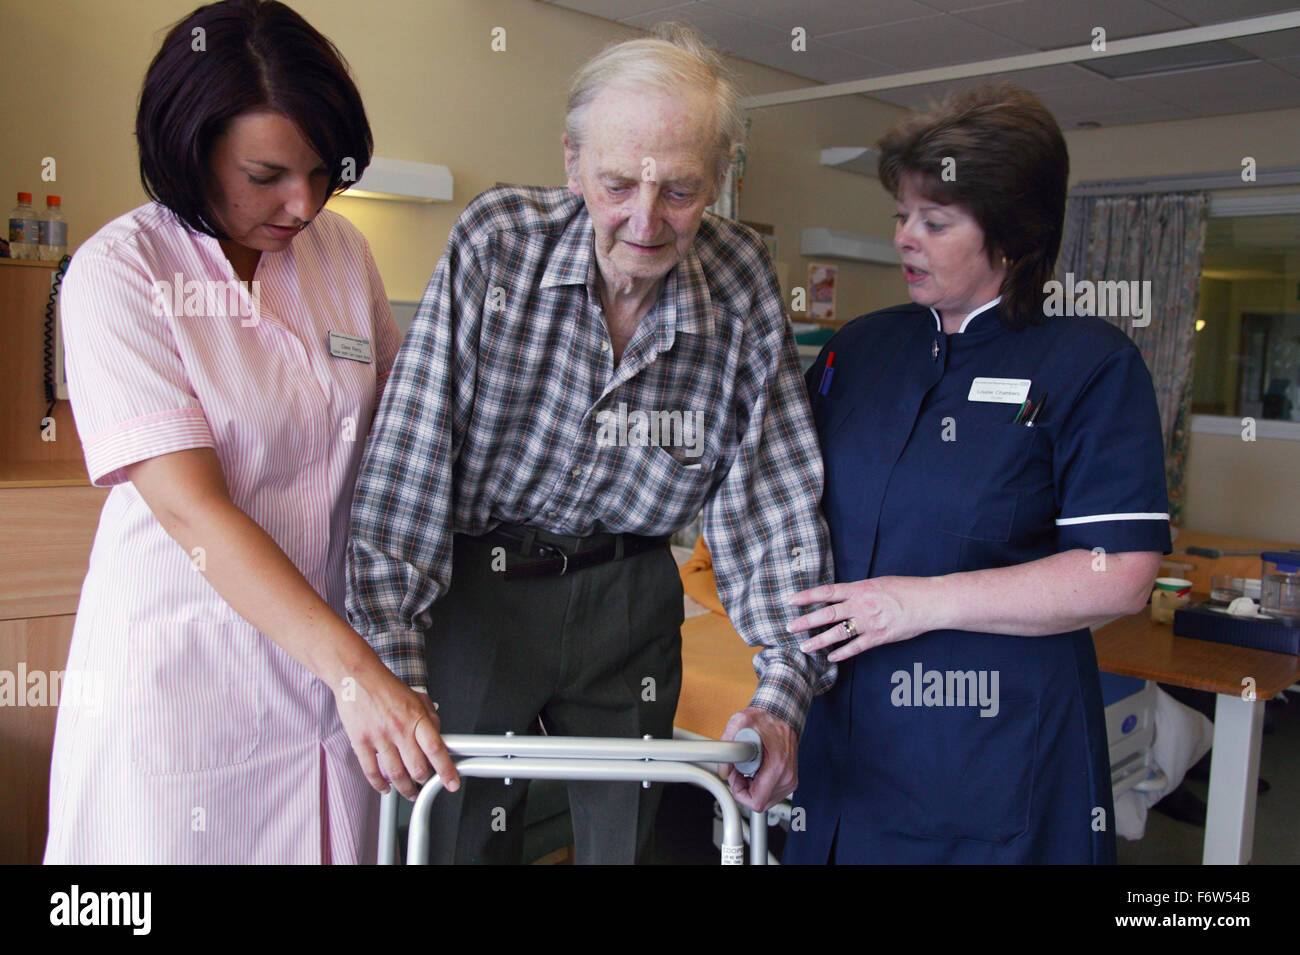 Nurse with disability and health care worker assisting elderly patient to mobilise using Zimmer frame, Stock Photo